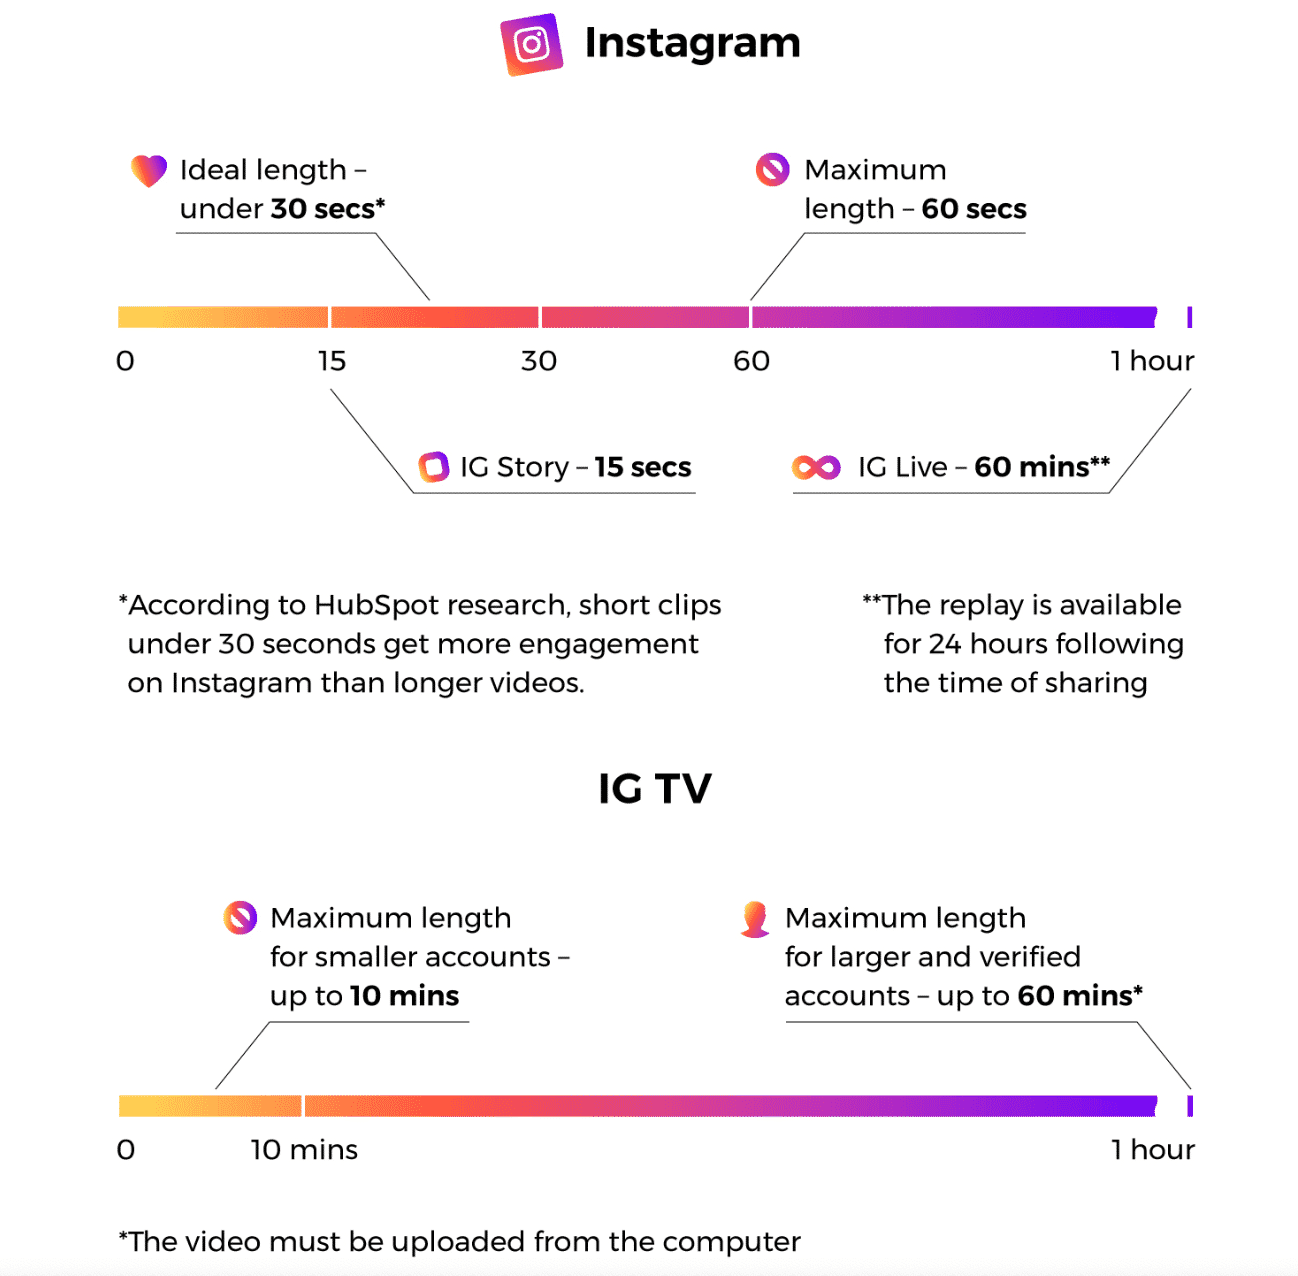 How long can your Instagram videos be?